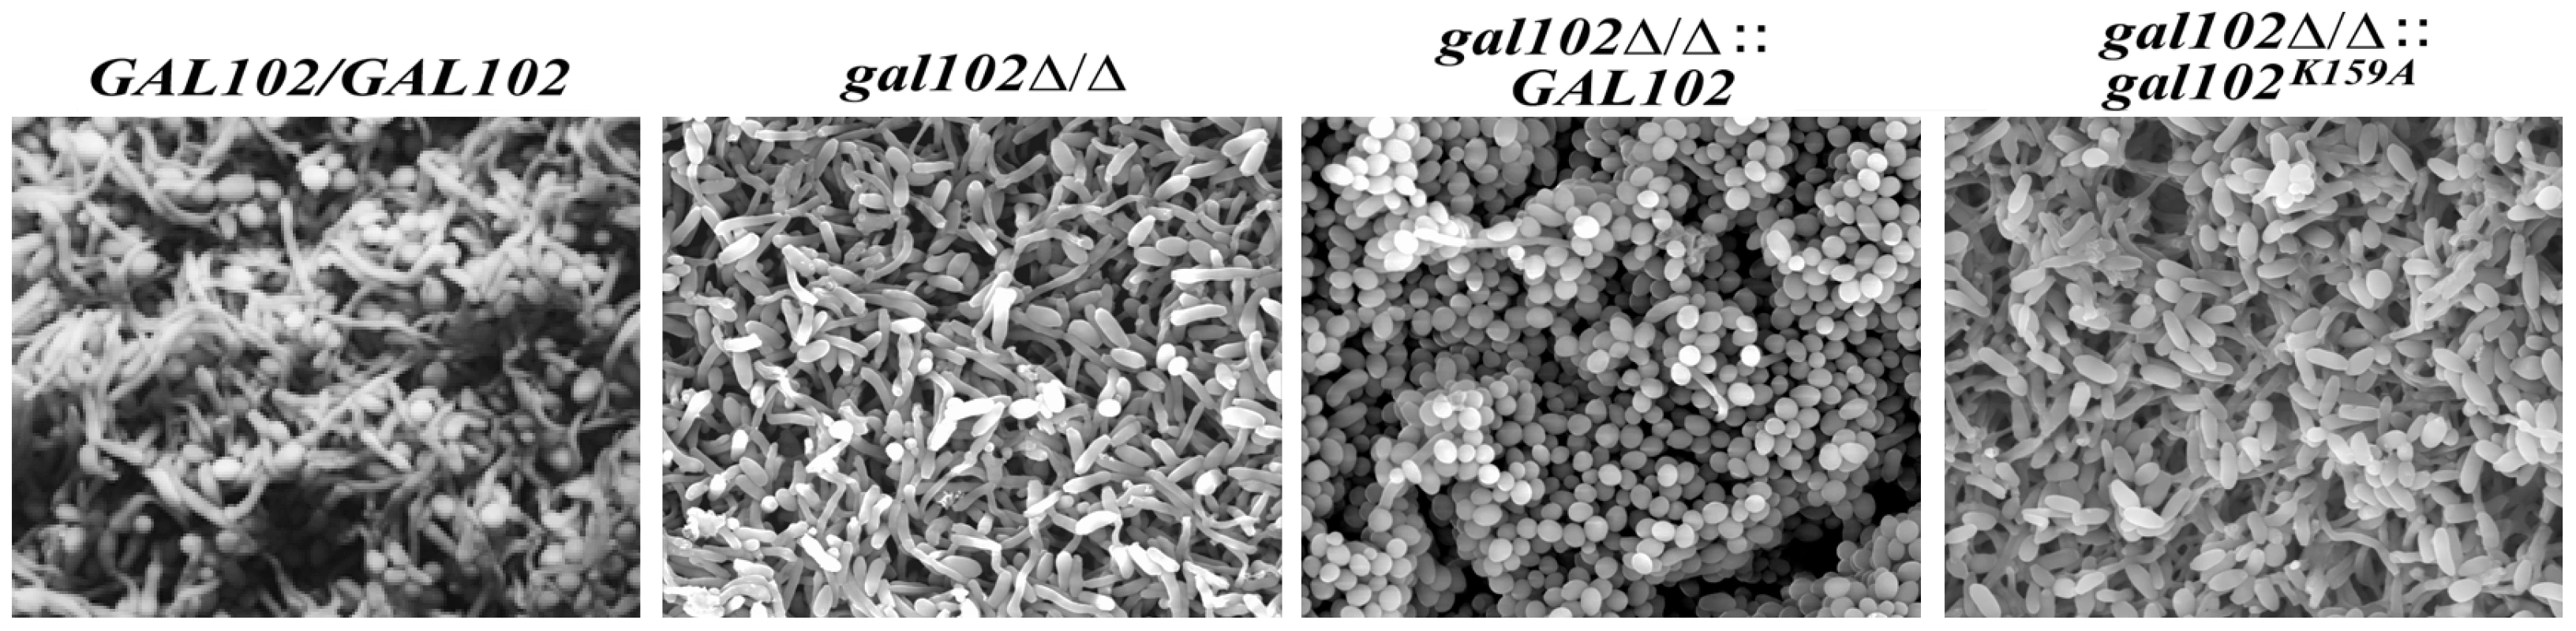 Biofilm structure and diffusion properties are seriously compromised in <i>C. albicans</i> lacking <i>GAL102</i>.